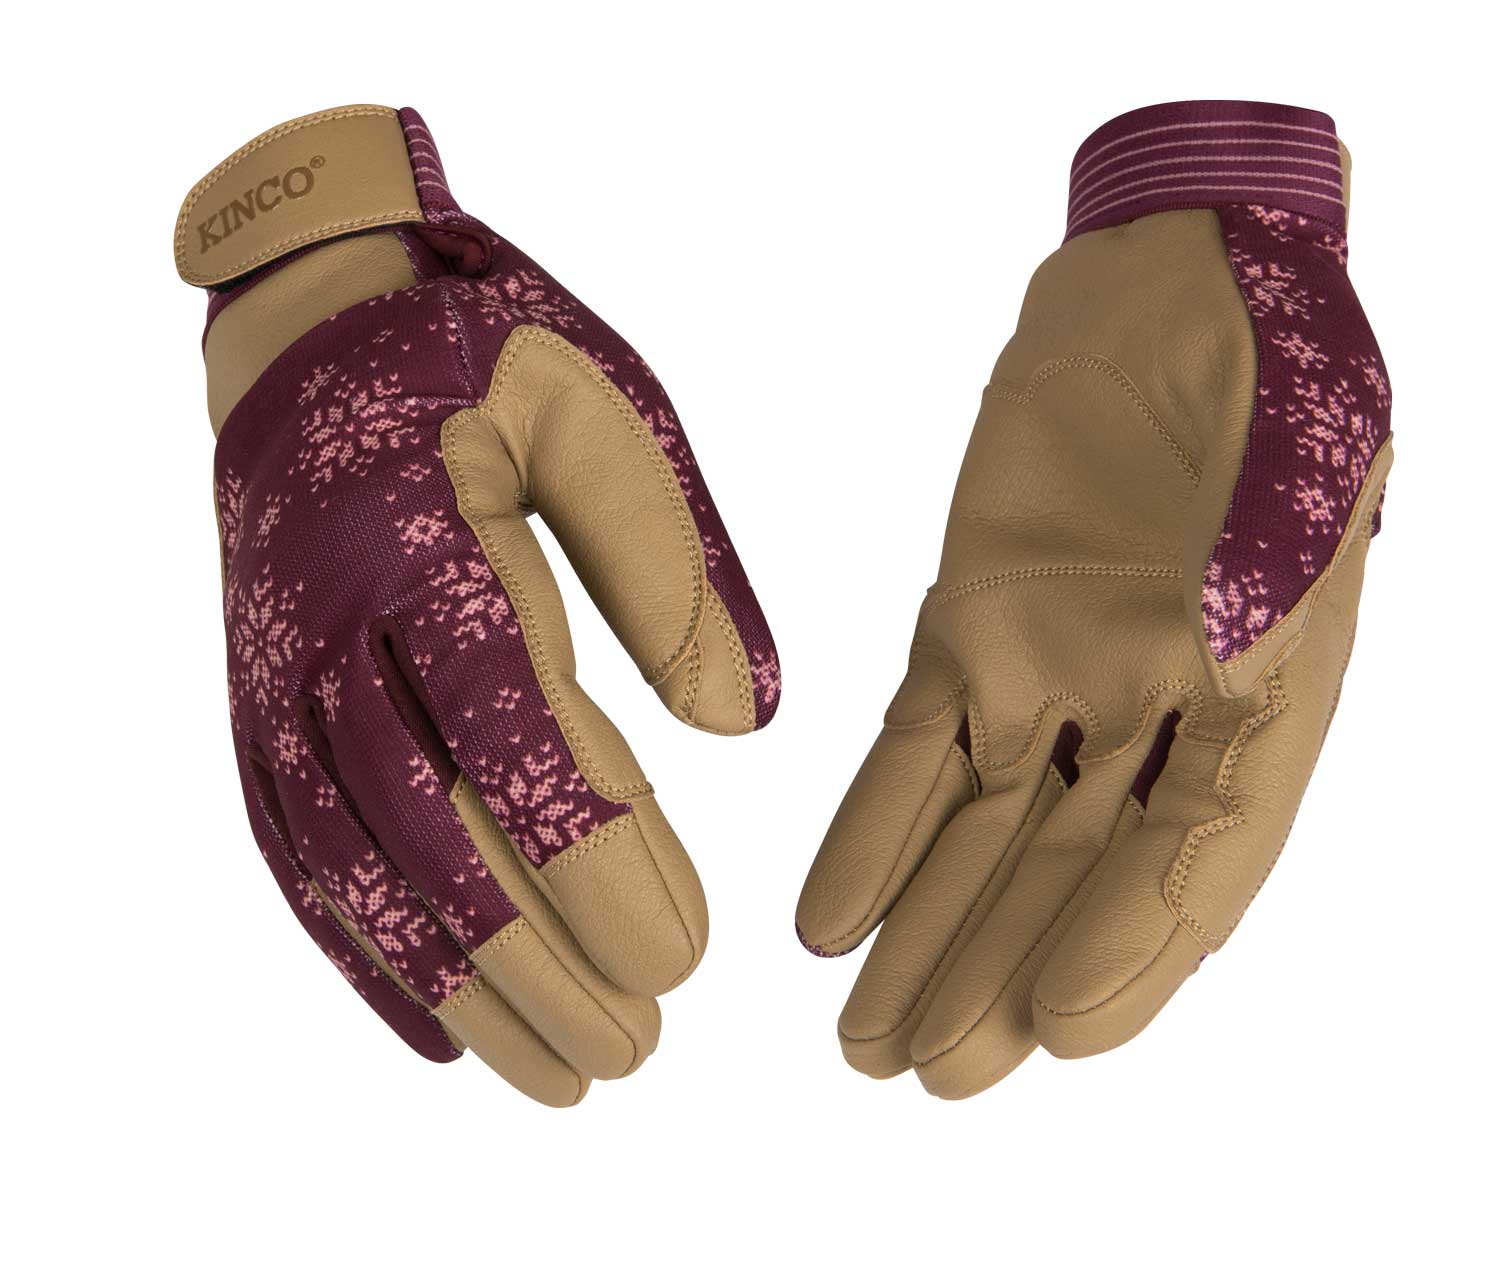 Lined Burgundy Synthetic Glove